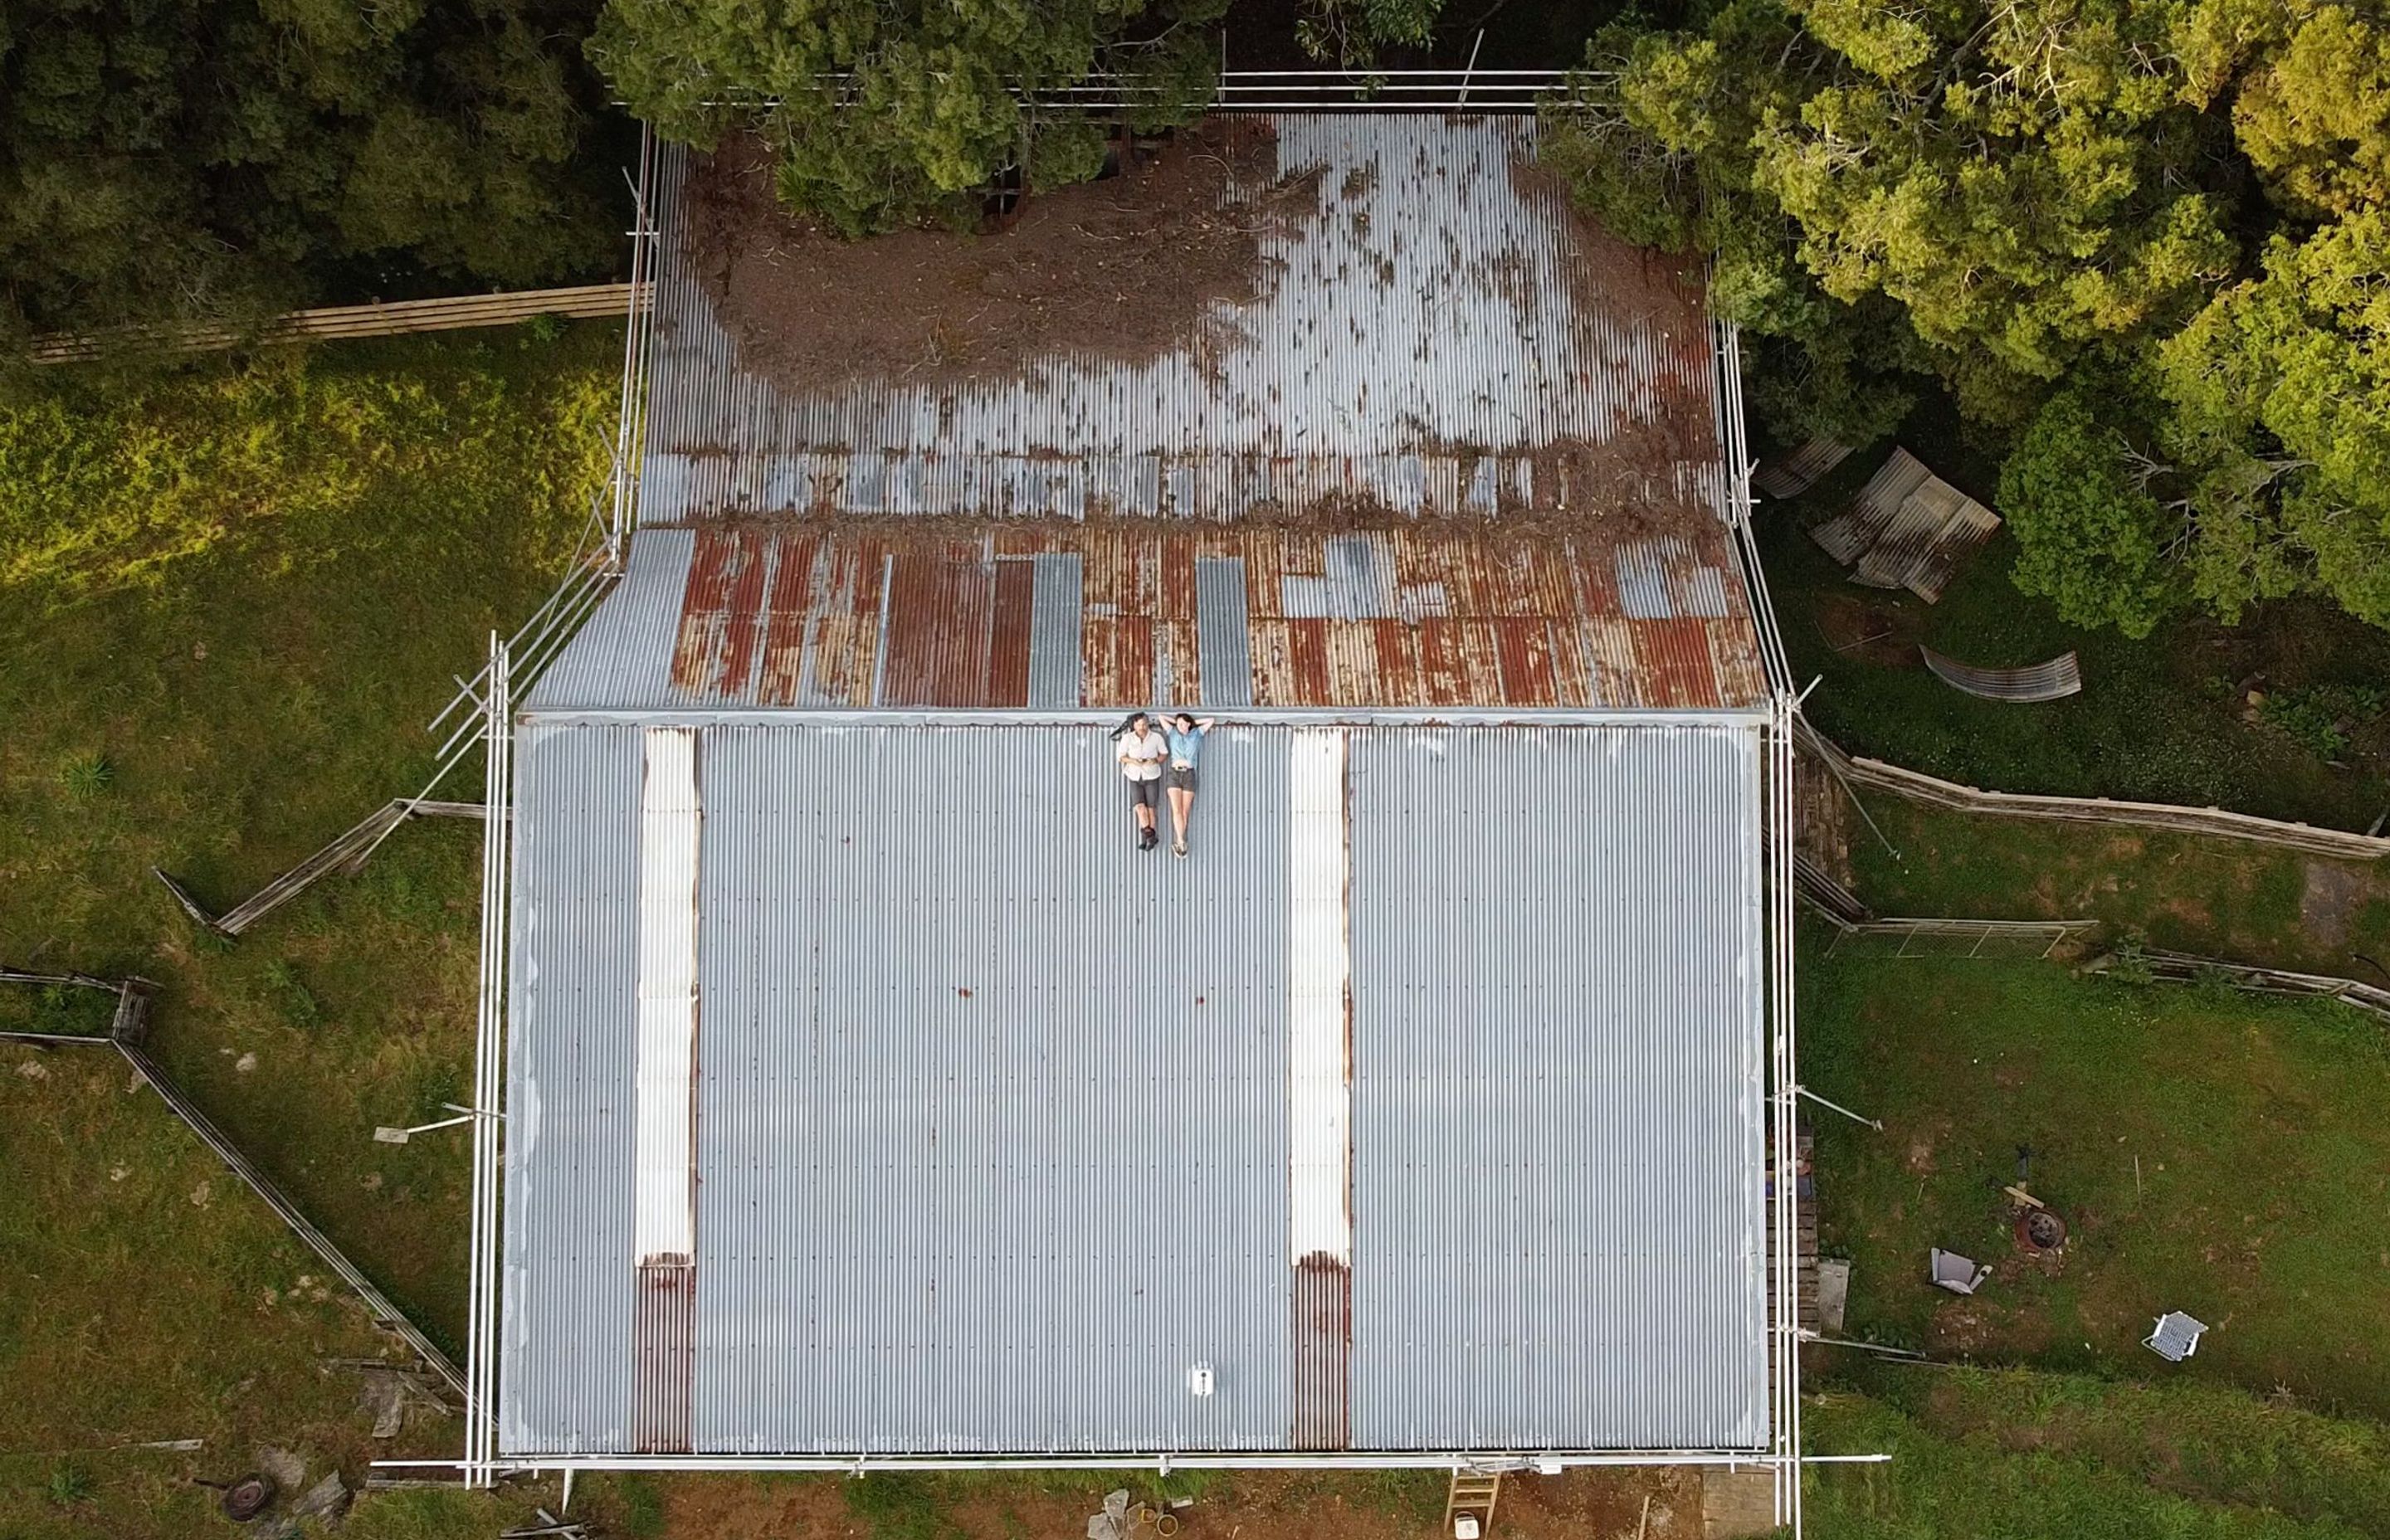 To bring further awareness to the cause, Dimond Roofing partnered with social media influencers and Kiwi couple, Damien Nikora and Chanelle Taylor (known online as The Current Place) for the restoration of their woolshed.